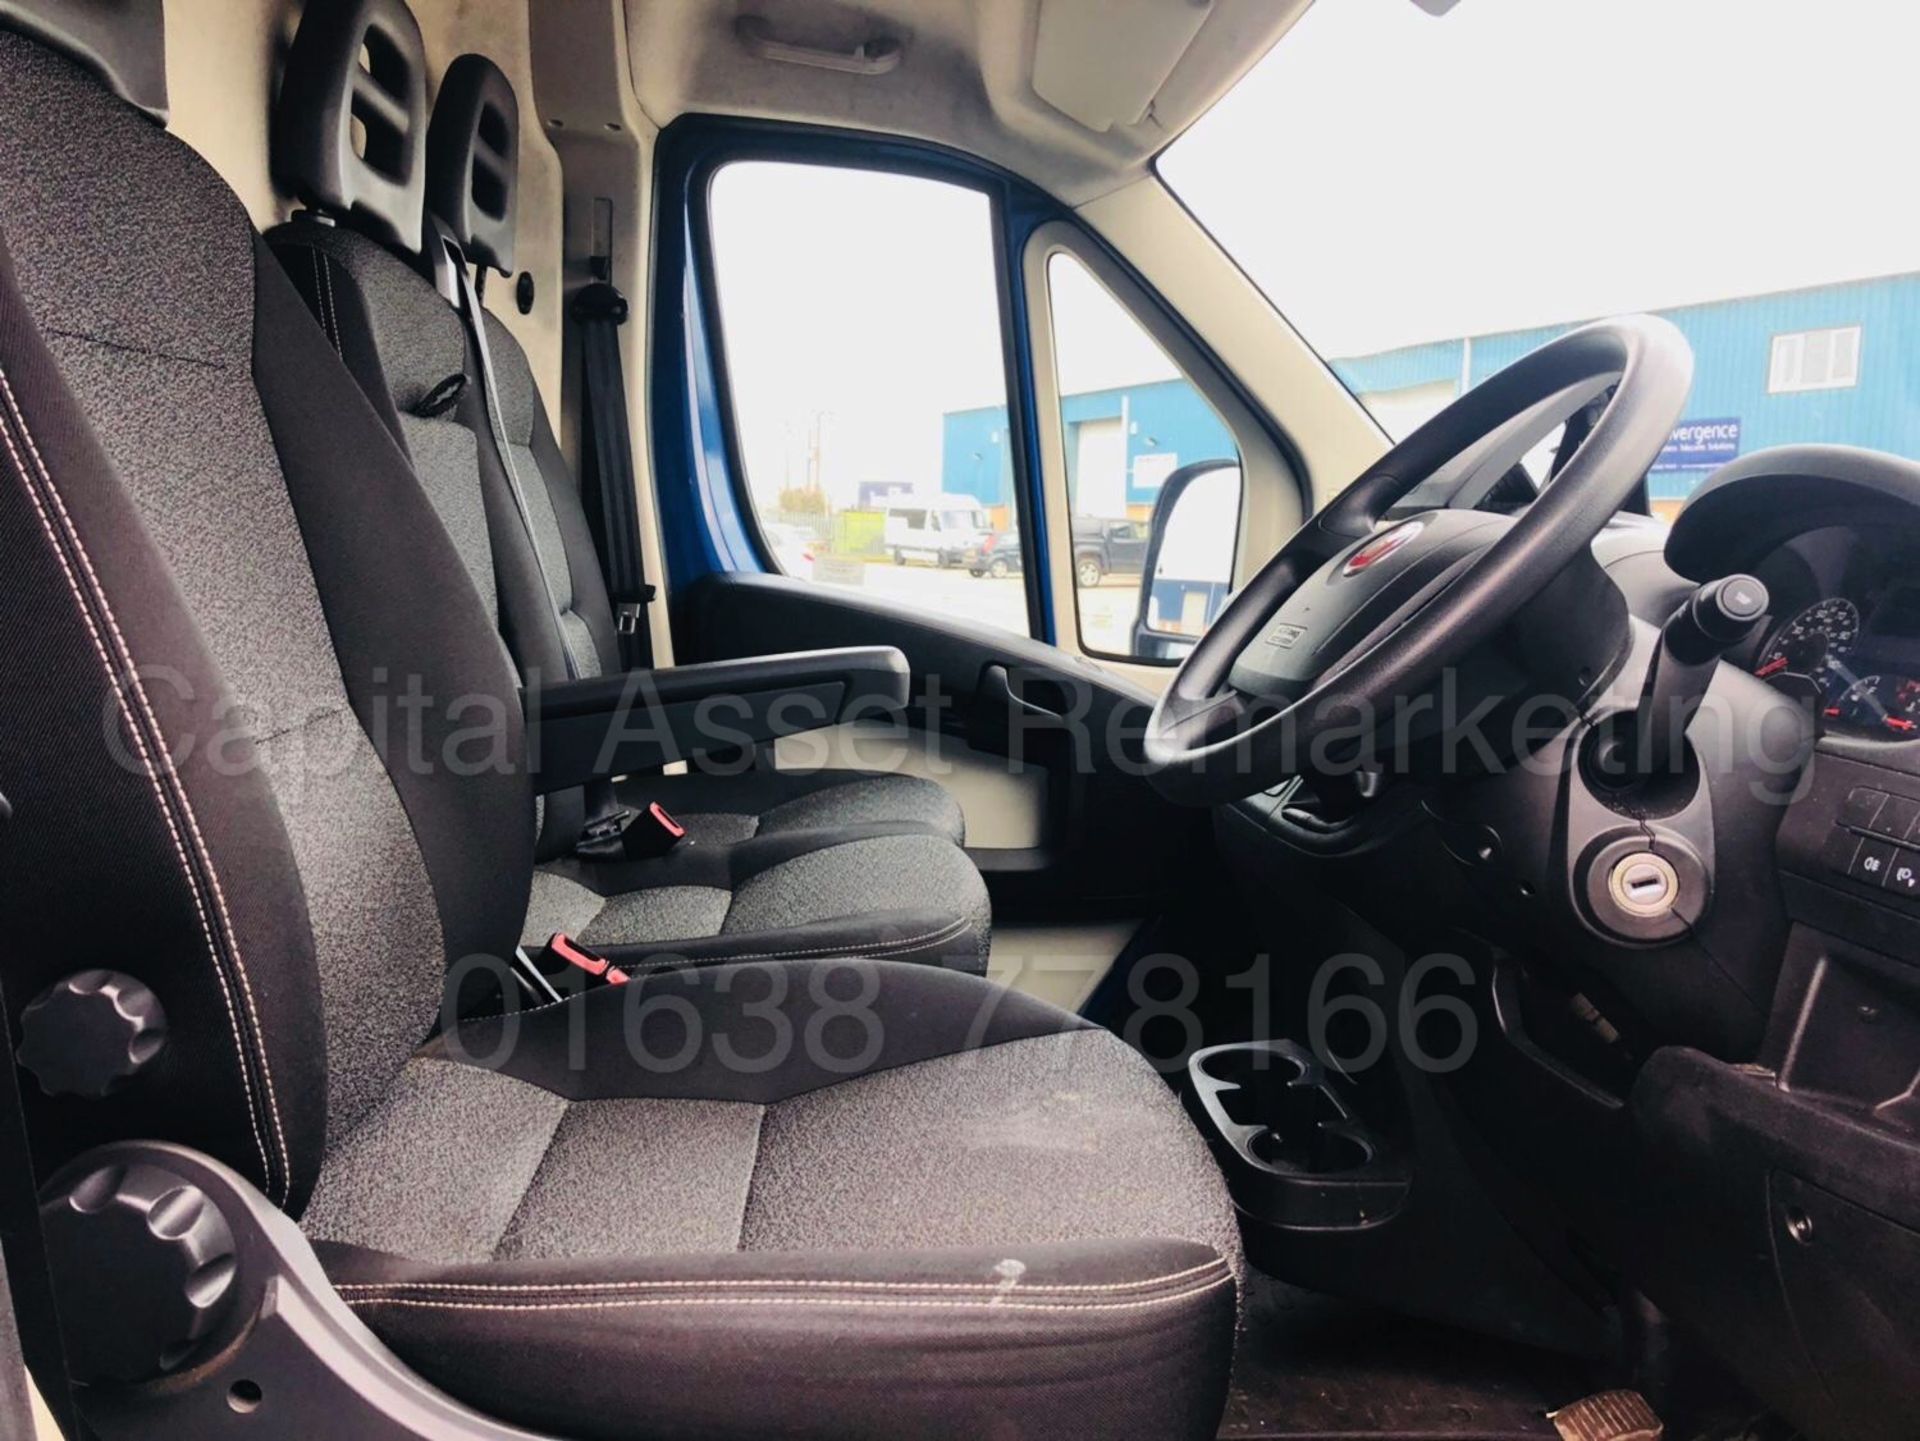 FIAT DUCATO 'XLWB HI-ROOF - MAXI' (2016 MODEL) '2.3 DIESEL - 130 BHP - 6 SPEED' (1 OWNER FROM NEW) - Image 27 of 32